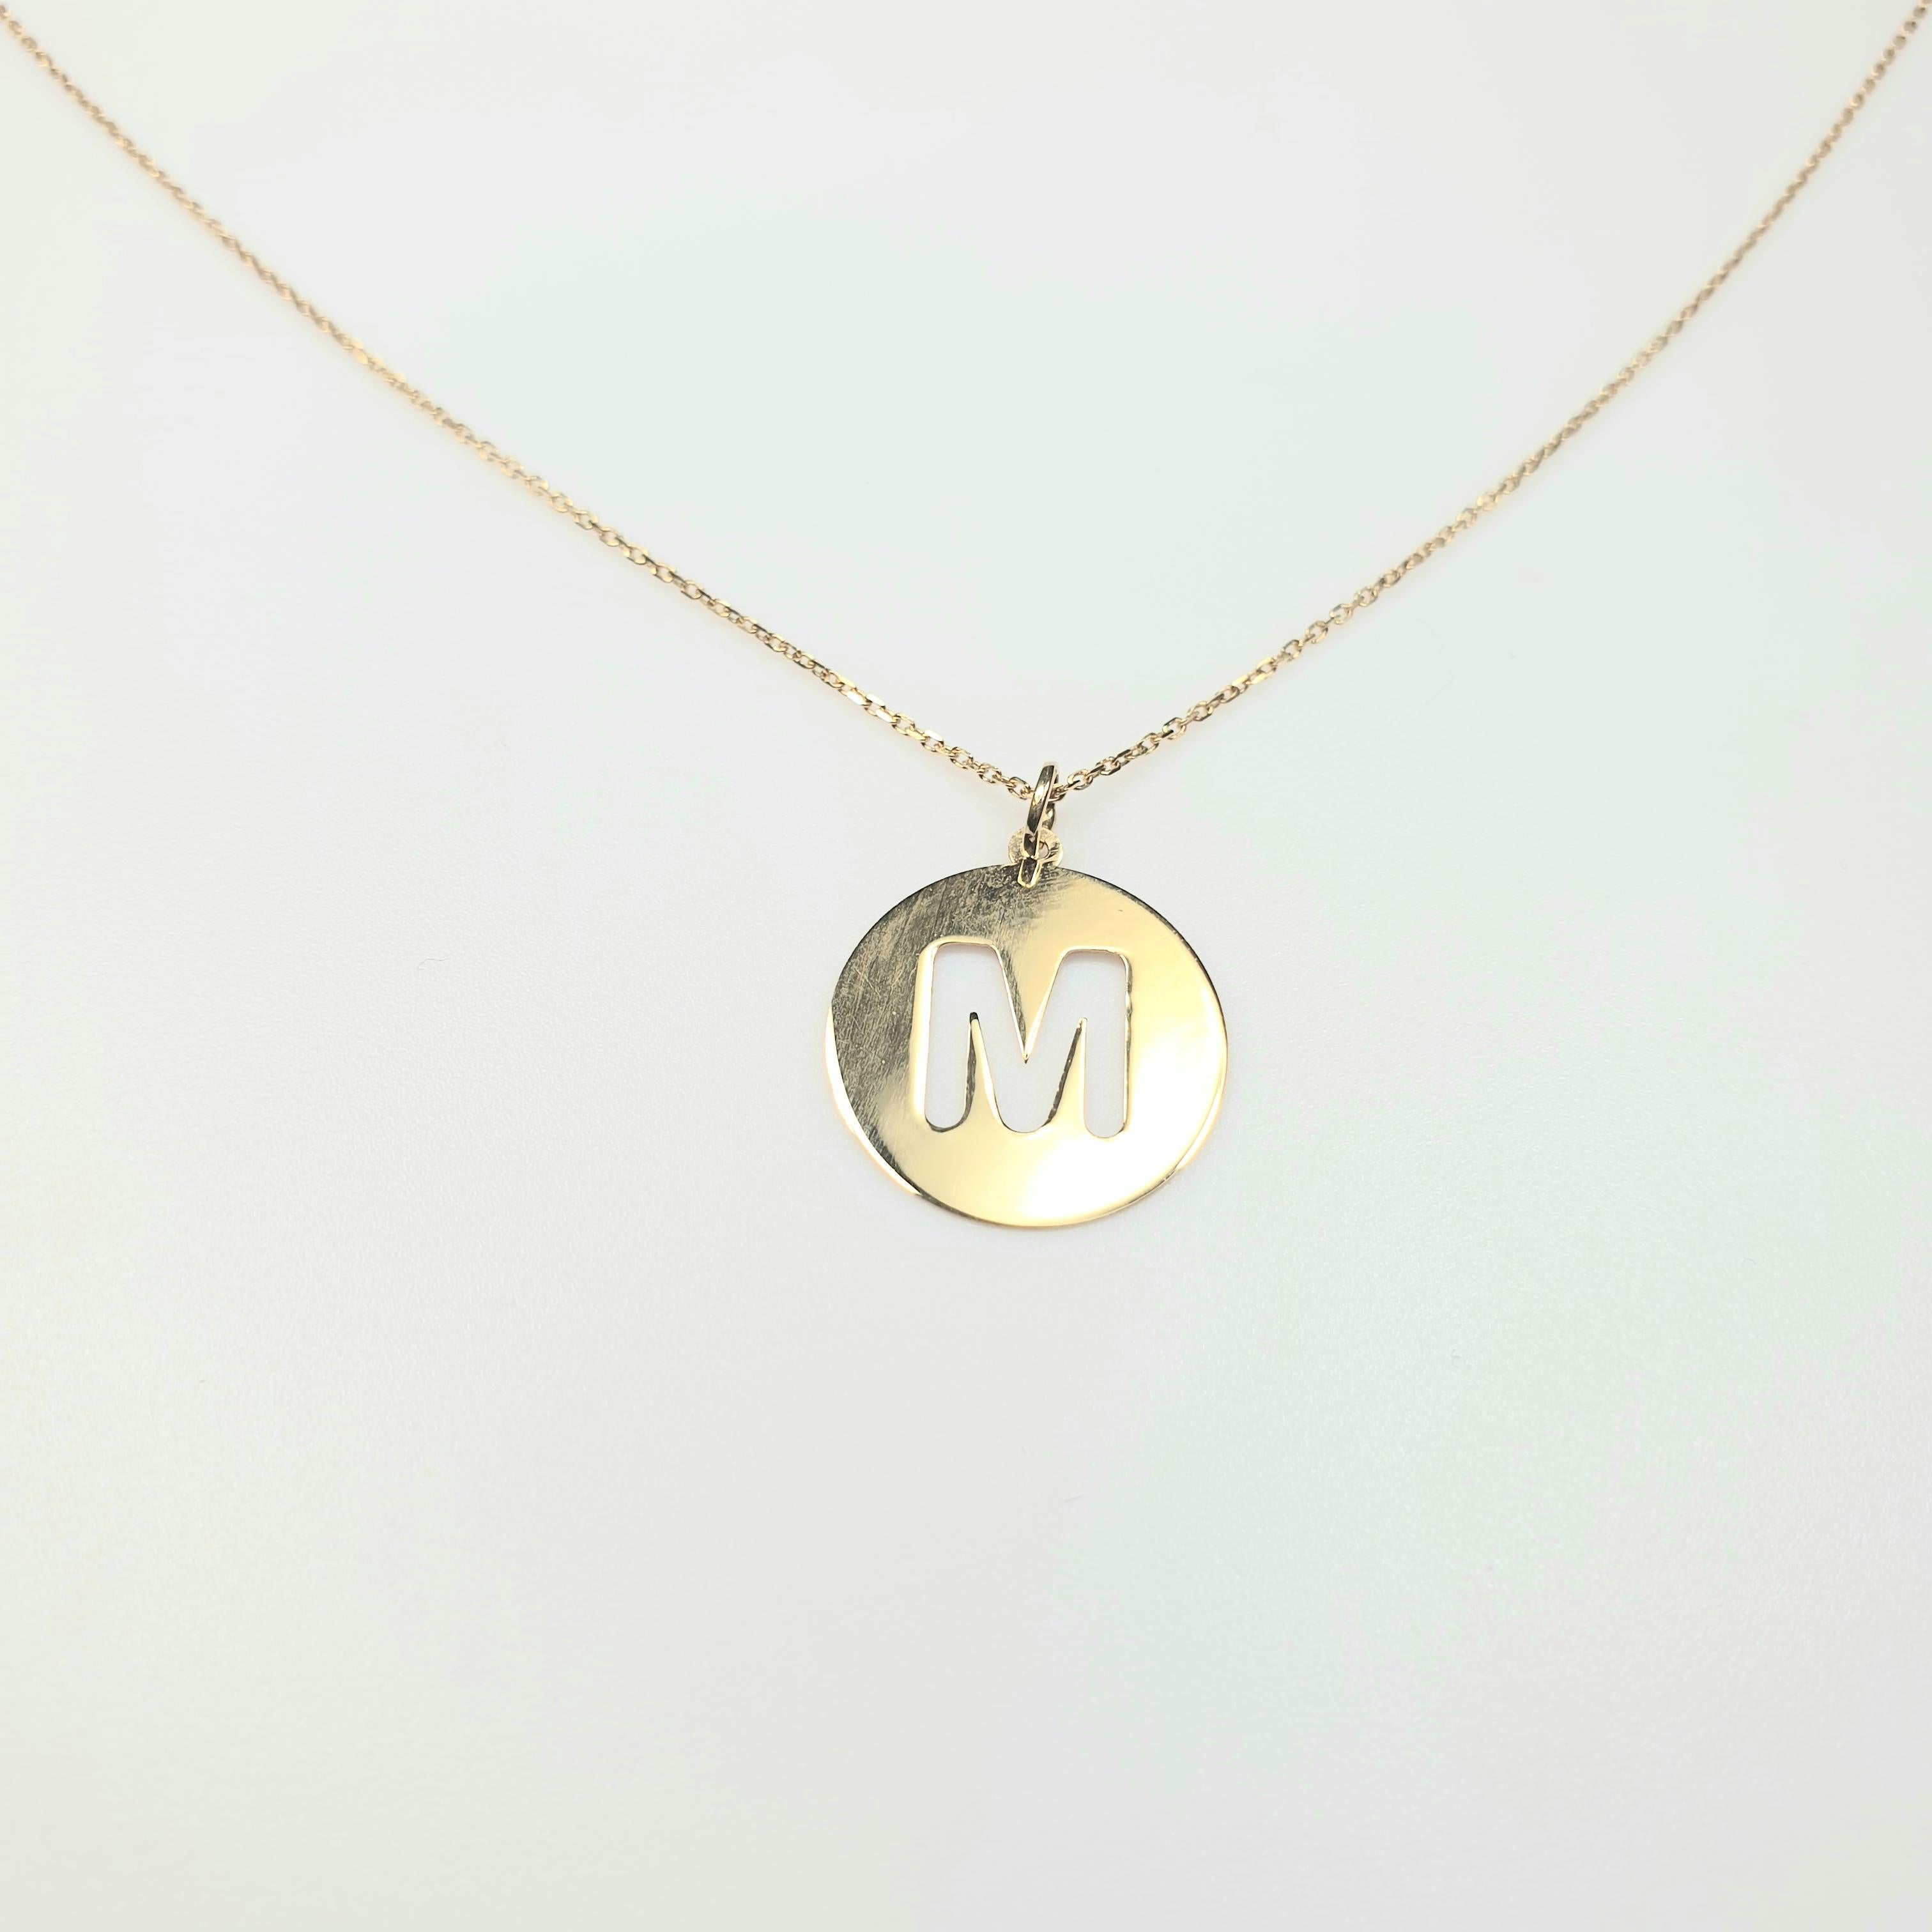 The alphabet collection, inspired in the the charming and bold modern iconography....
Options metals 3 colours, rose, yellow and white 

READY TO SHIP
*Shipment of this piece is not affected by COVID-19. Orders welcome!

MATERIAL
◘ Weight 1.7grams